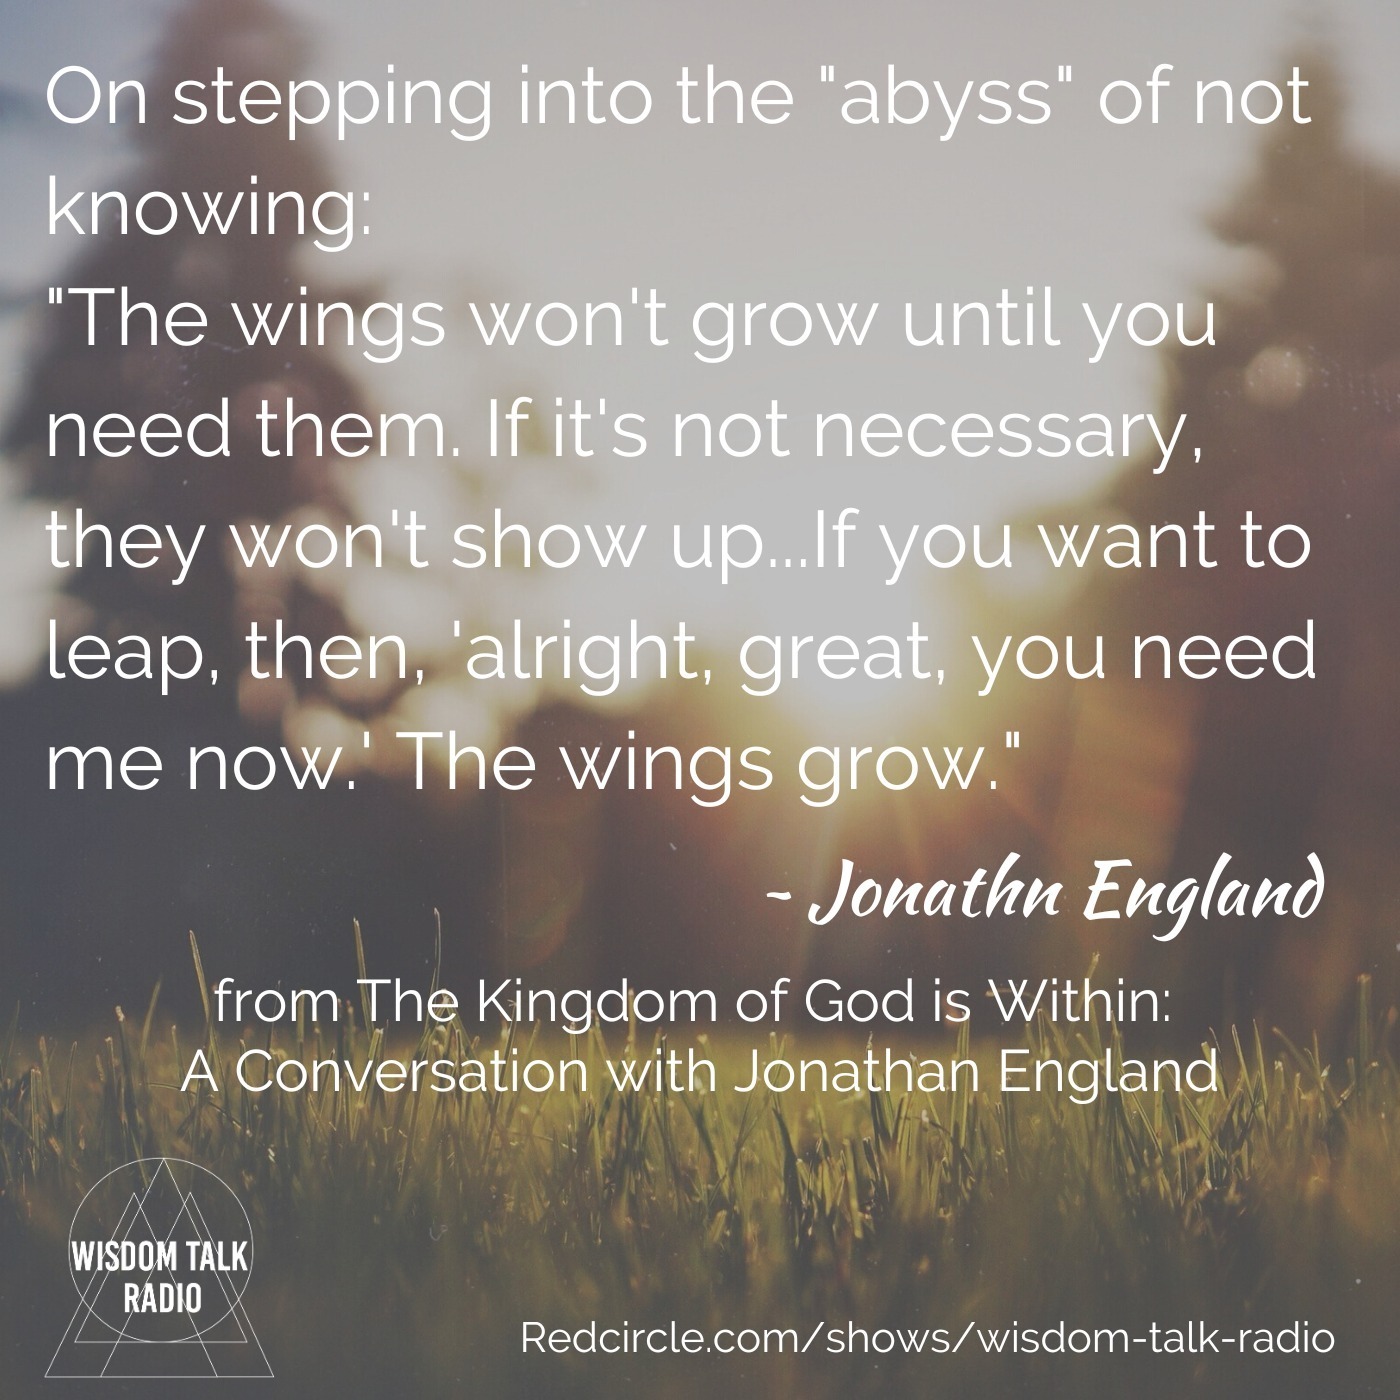 The Kingdom of God is Within: a Conversation with Jonathan England